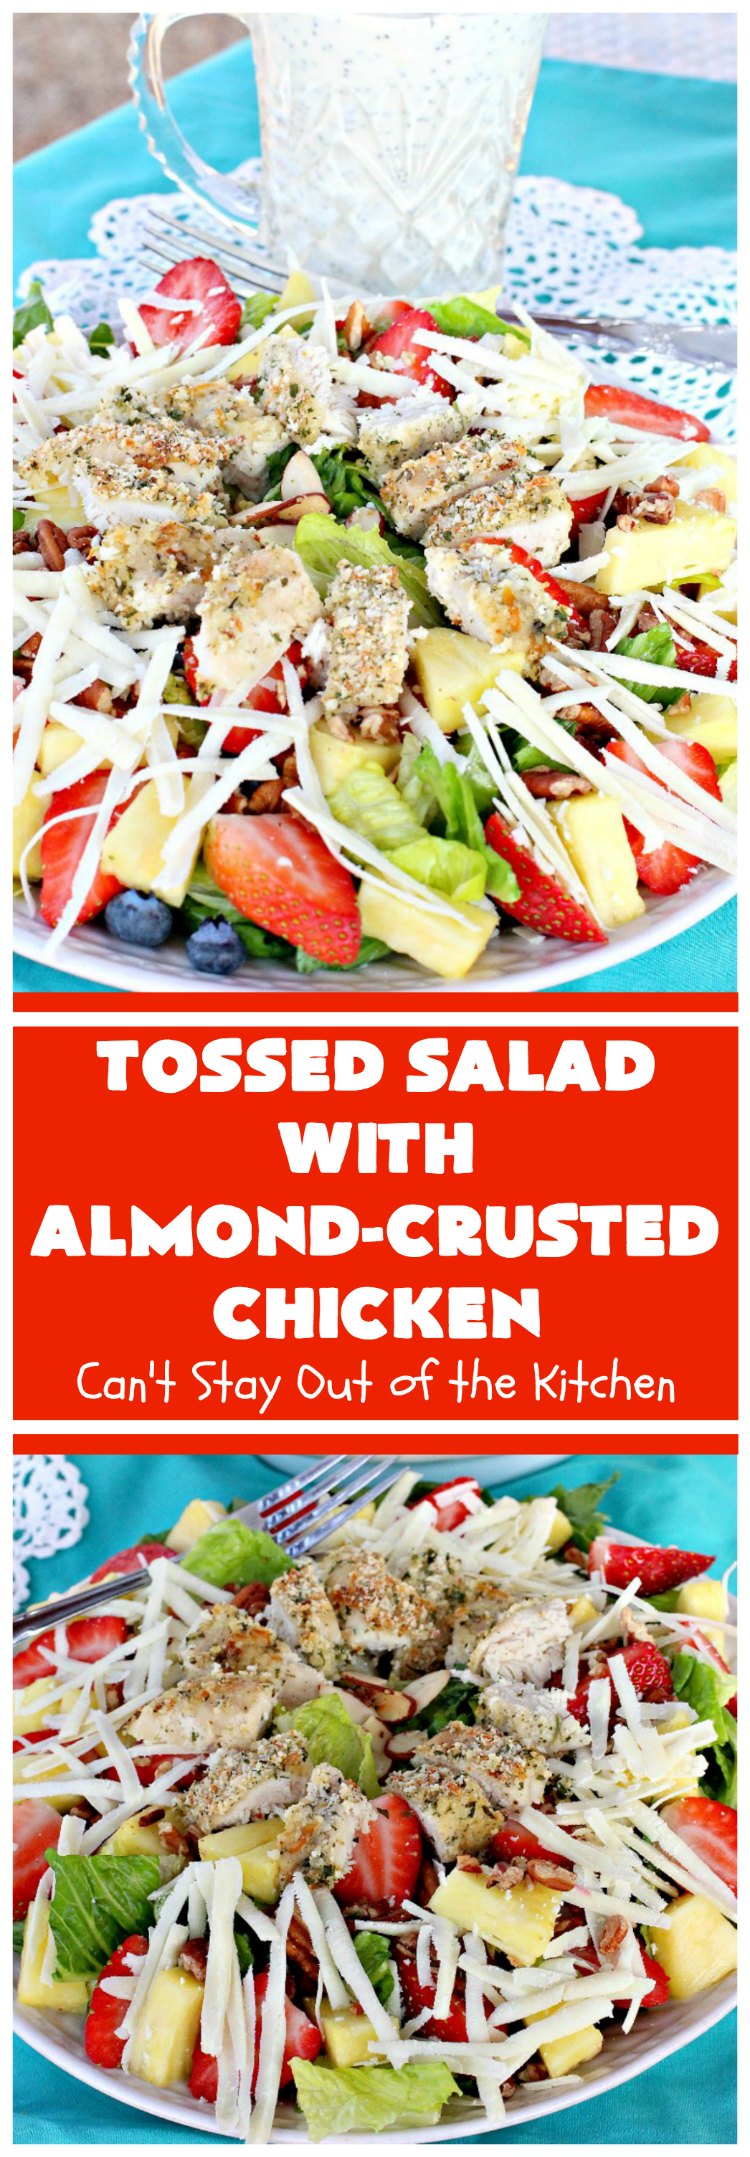 Tossed Salad with Almond-Crusted Chicken | Can't Stay Out of the Kitchen